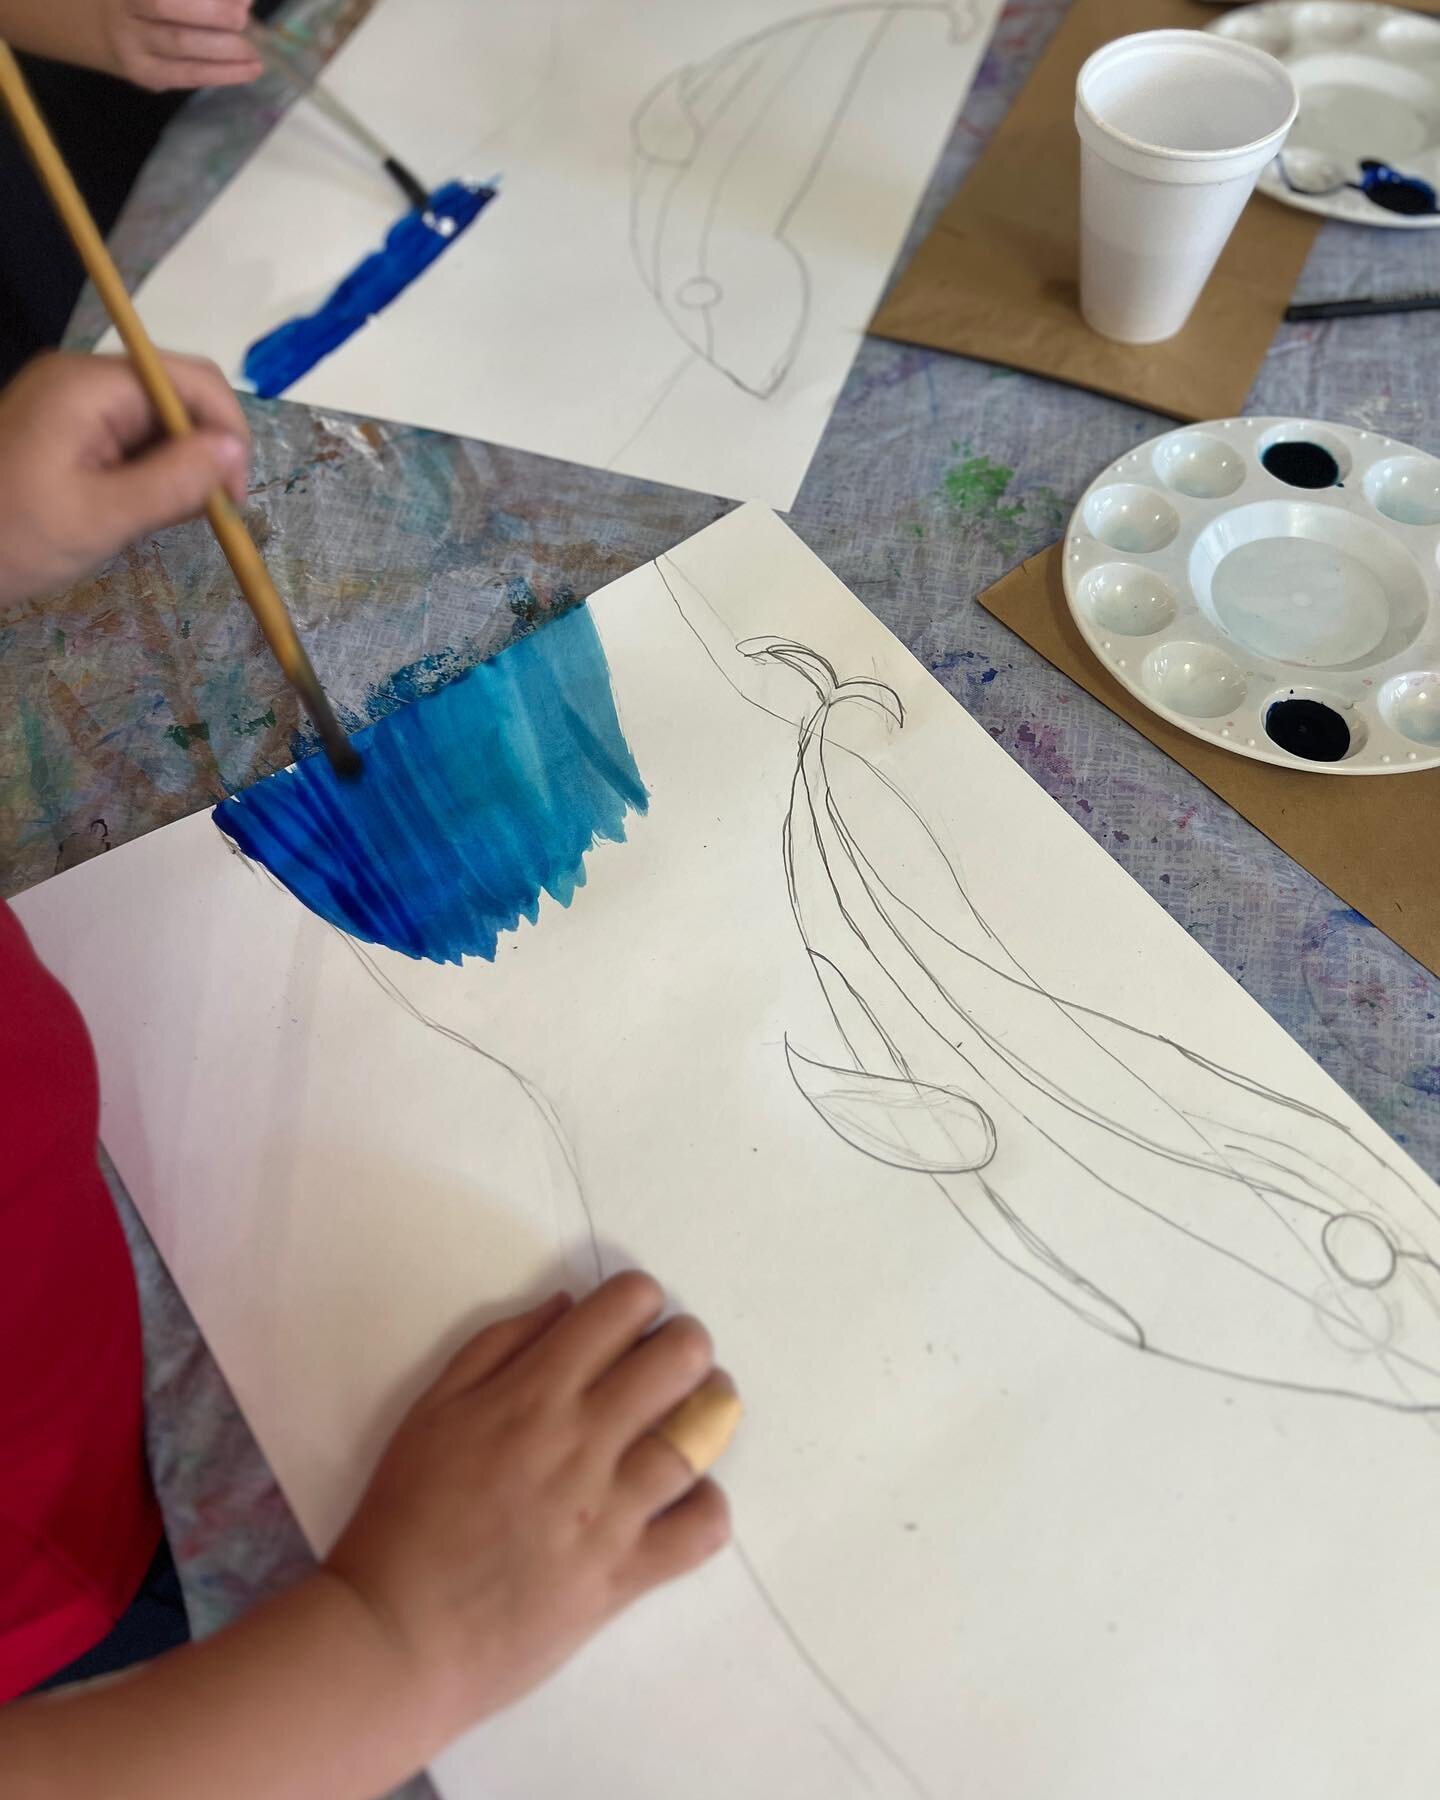 We are dreaming of summer in K2 this week!! 🌊 We are working in liquid watercolor and acrylic paint to create value in our new seascape! 💕🎨 

#art #artteacher #kidart #artforkids #dallas #dallasart